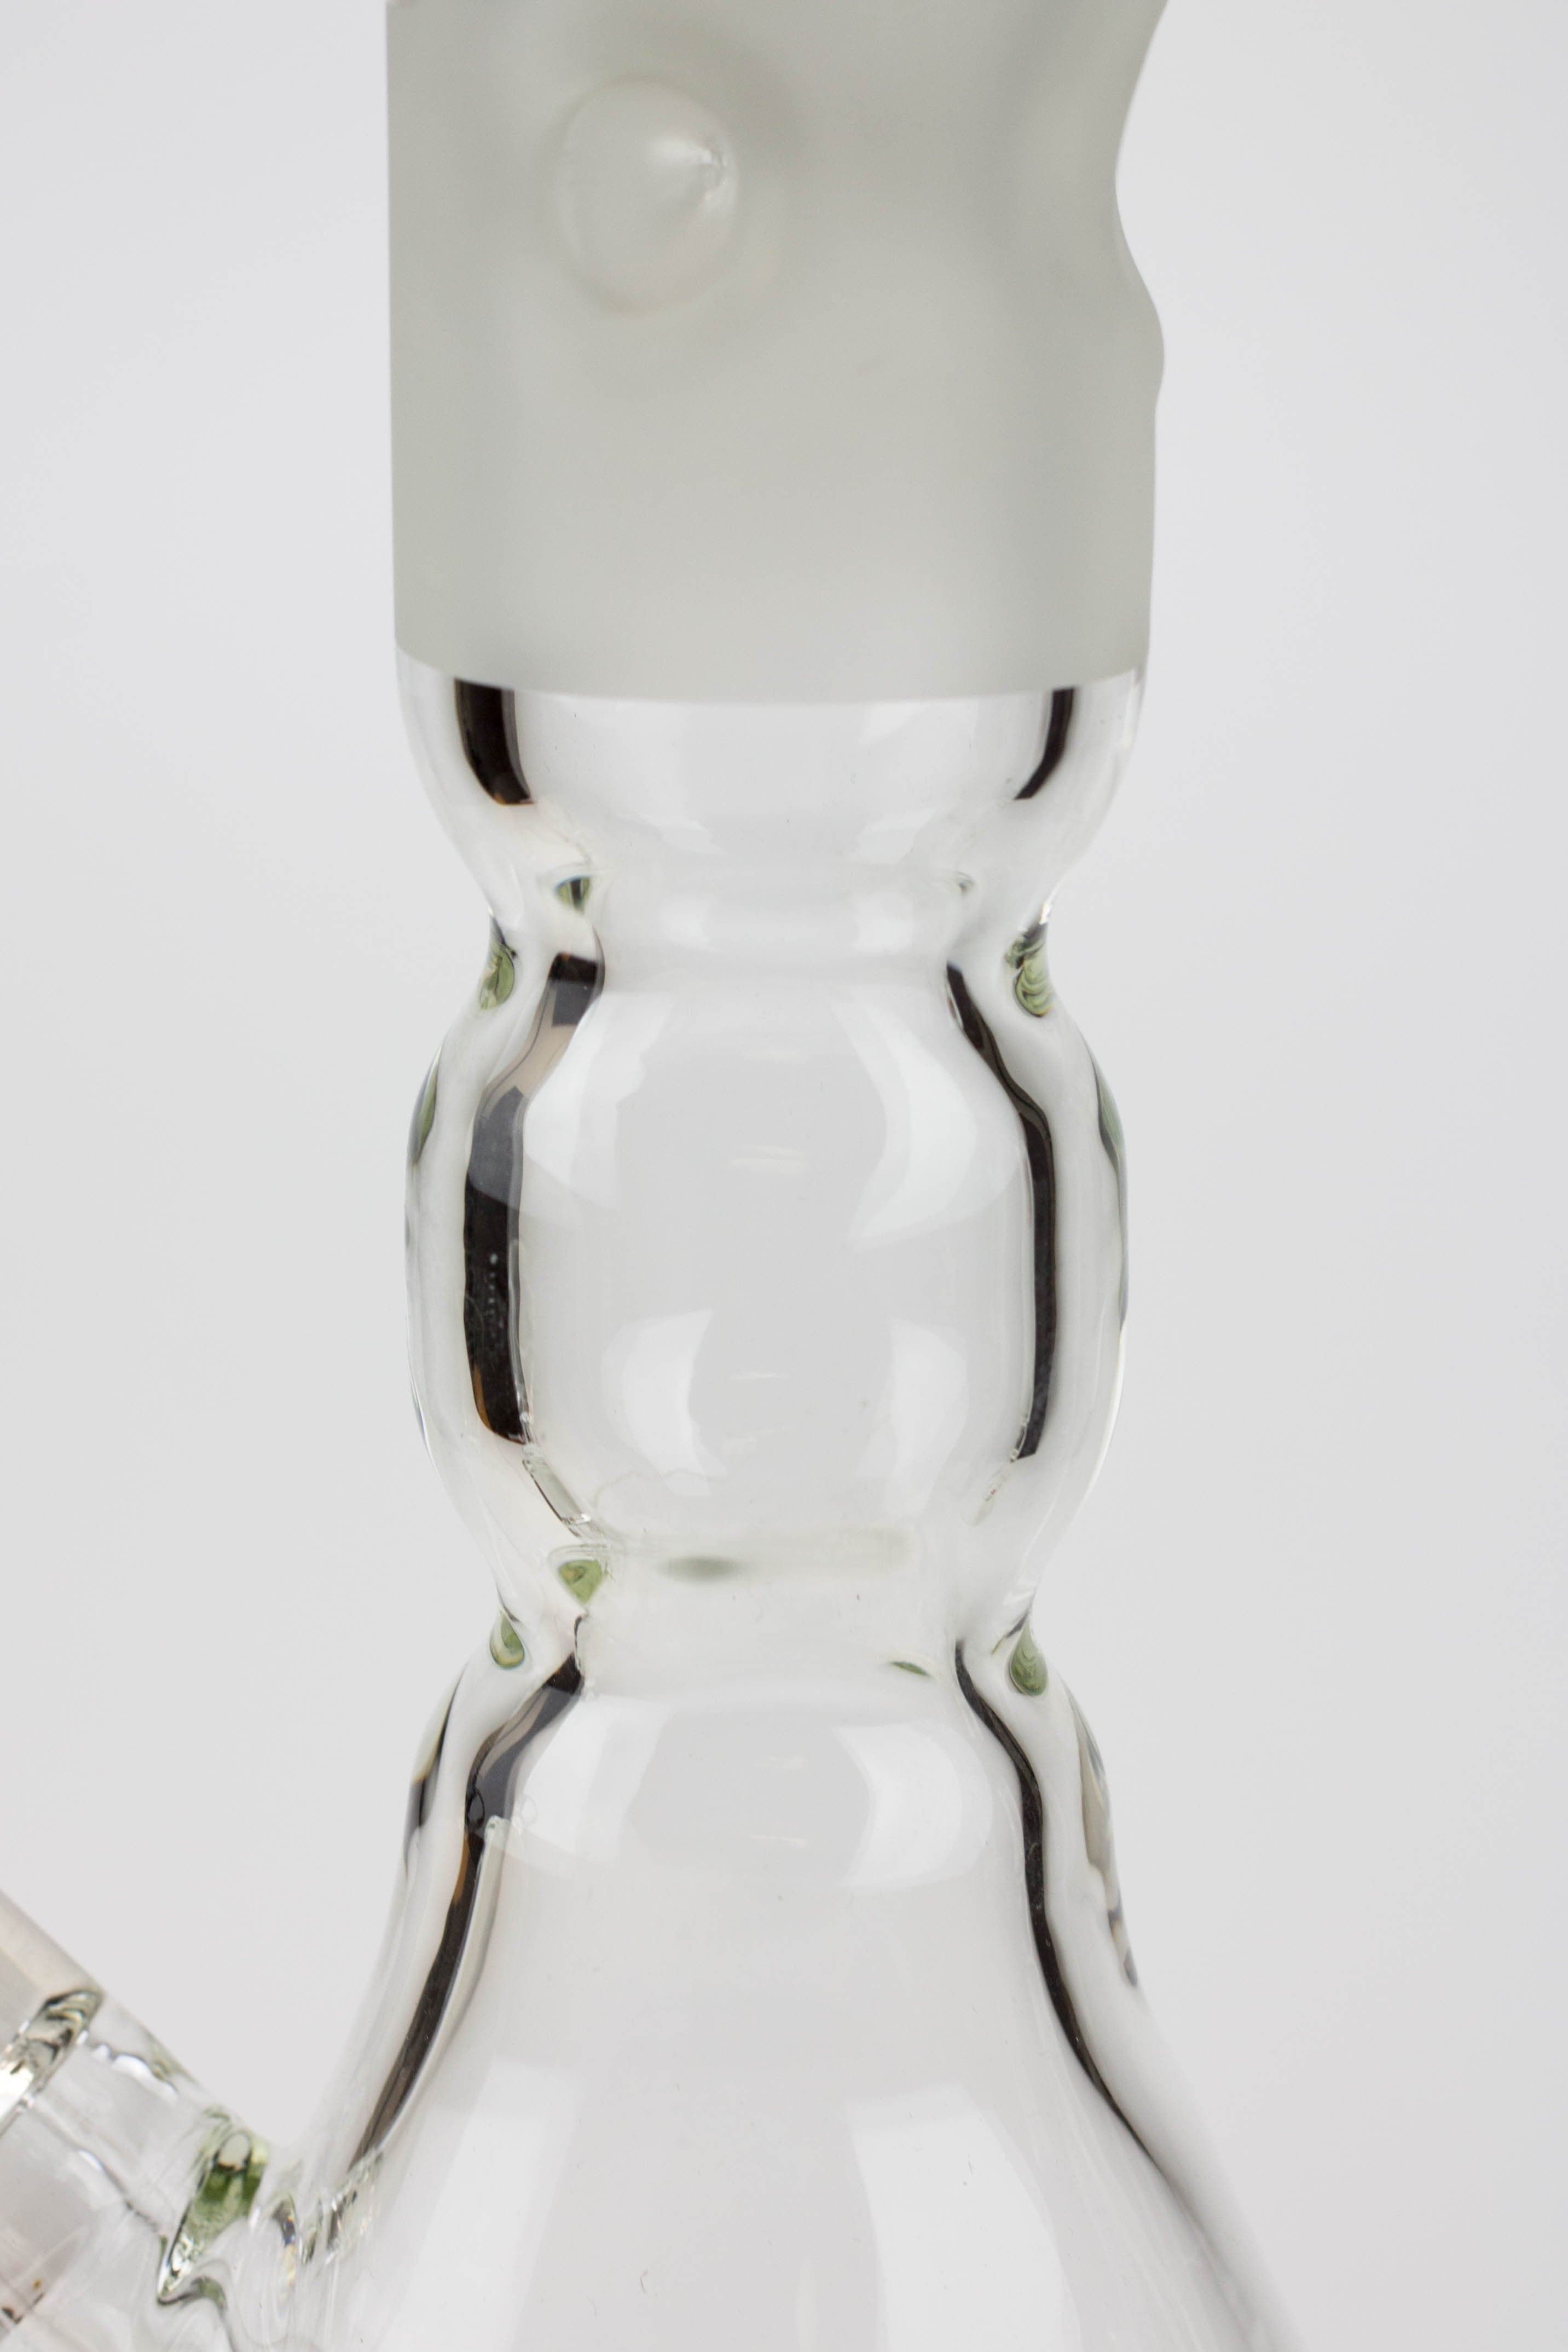 Kush curved tube glass water pipes_11